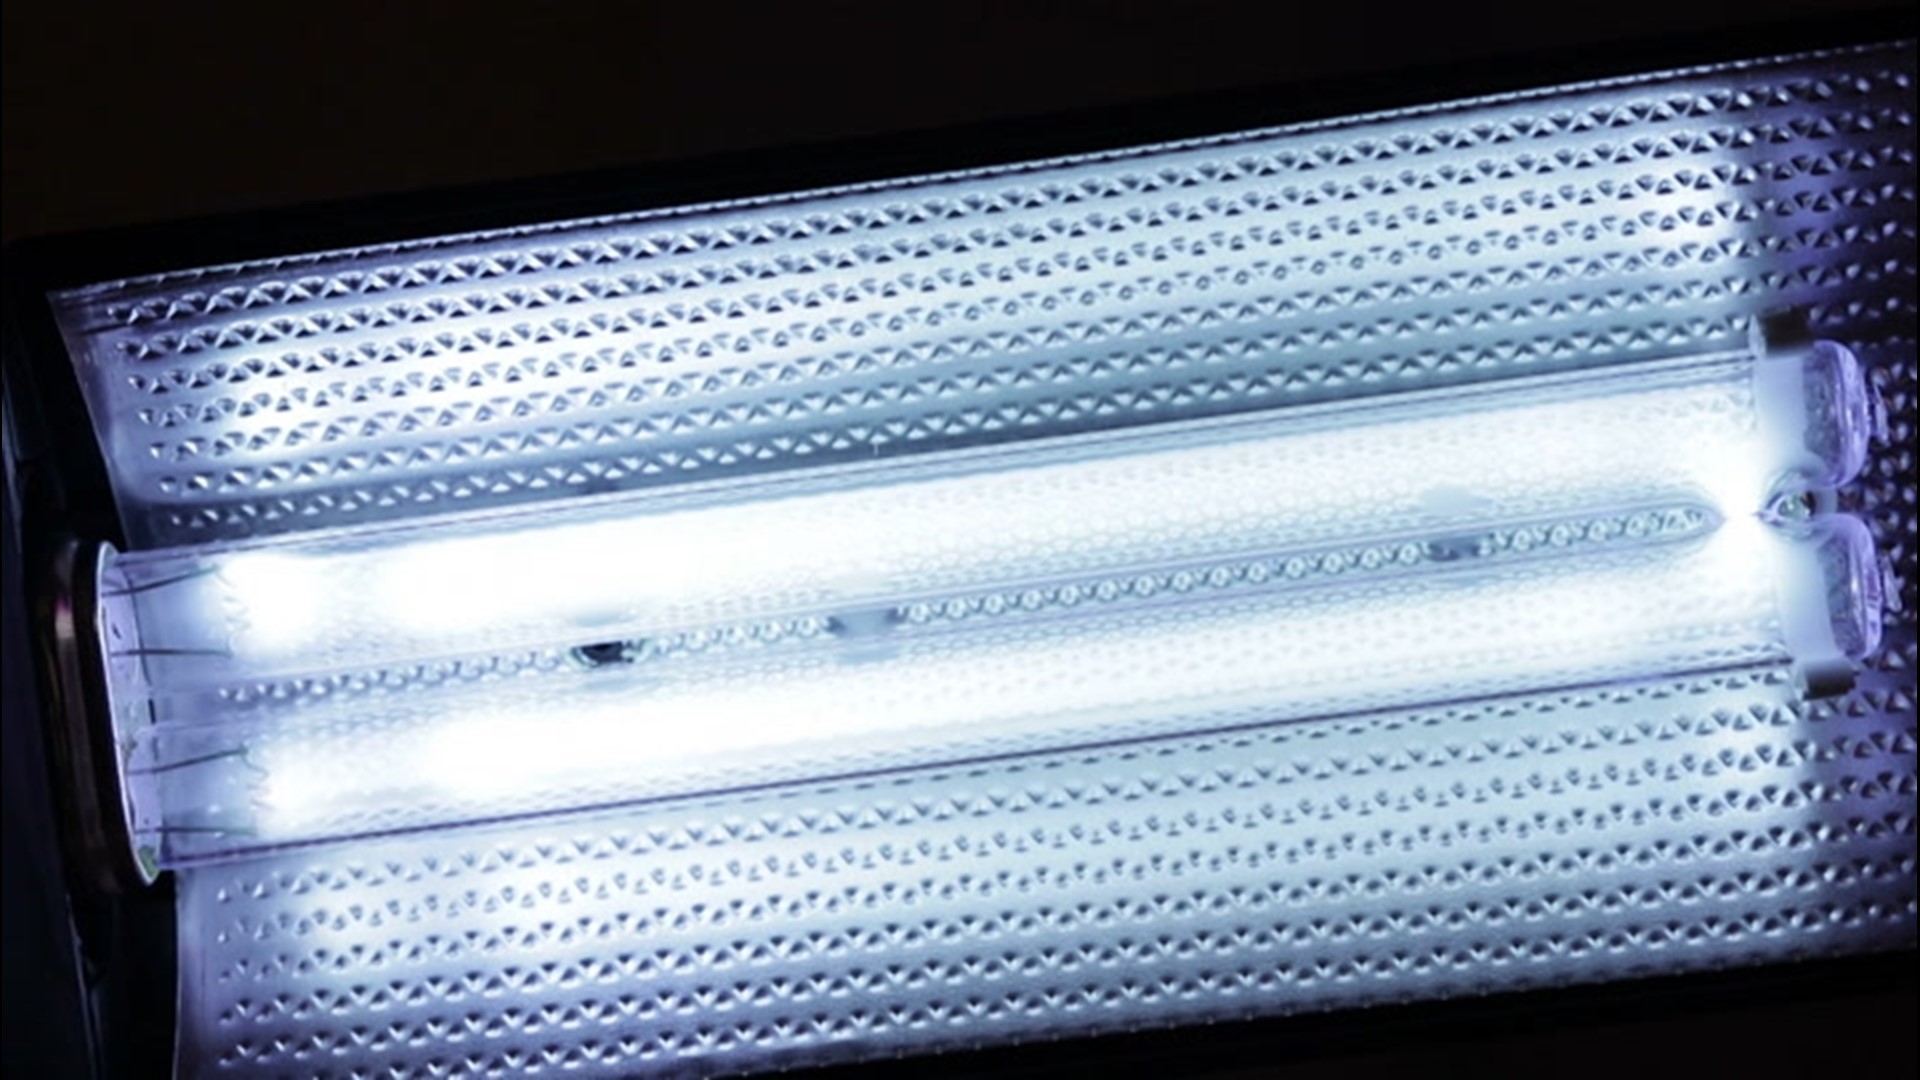 A new study published by the Proceedings of the National Academy of Sciences found that UV light has a particularly significant effect on the spread of SARS-CoV-2, the virus that causes COVID-19.